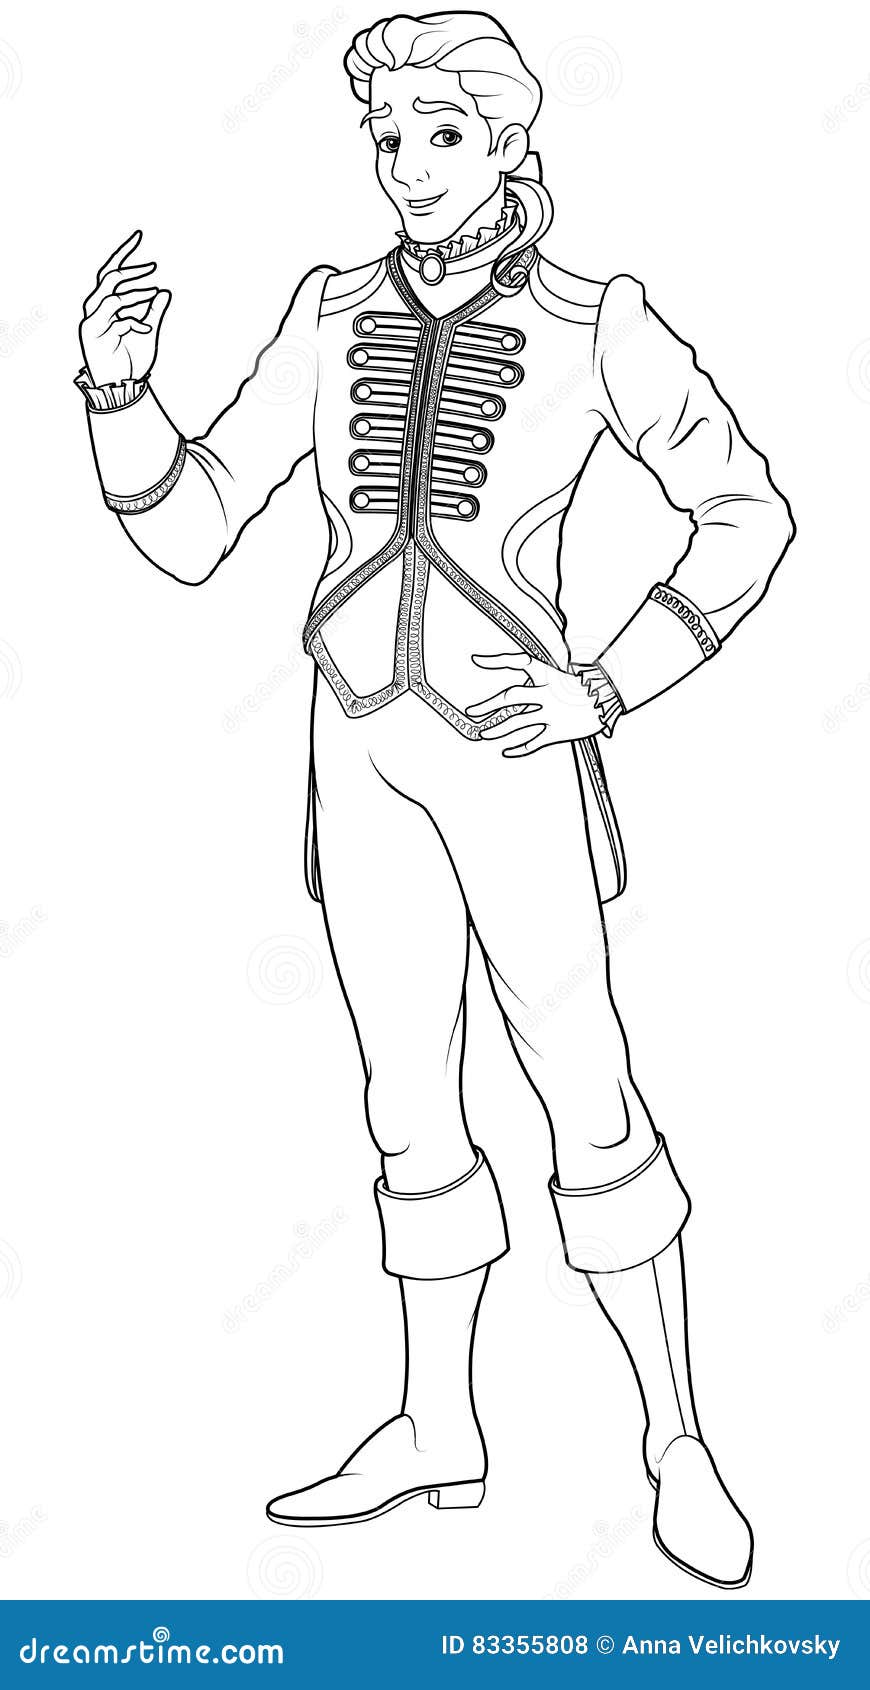 prince charming coloring page